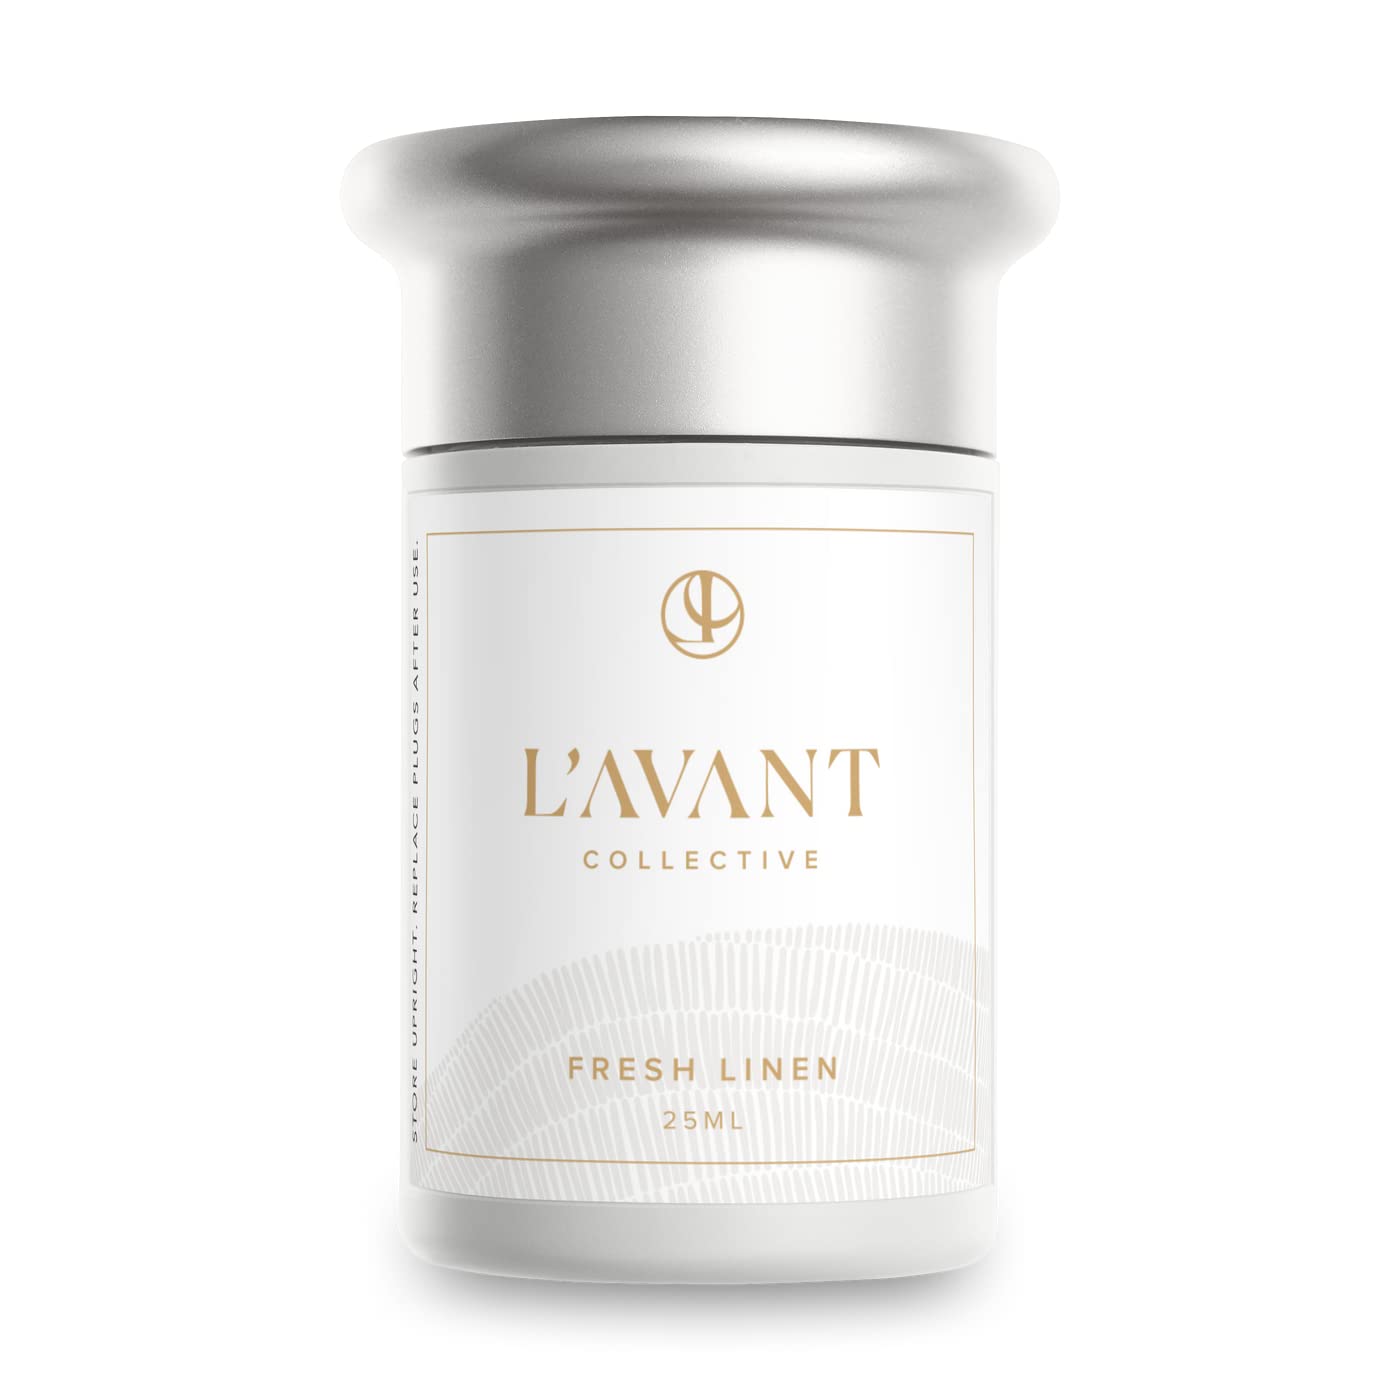 Aera L’Avant Fresh Linen Home Fragrance Scent Refill - Notes of Ylang Ylang, Bamboo and Lavender - Works with The Aera Diffuser